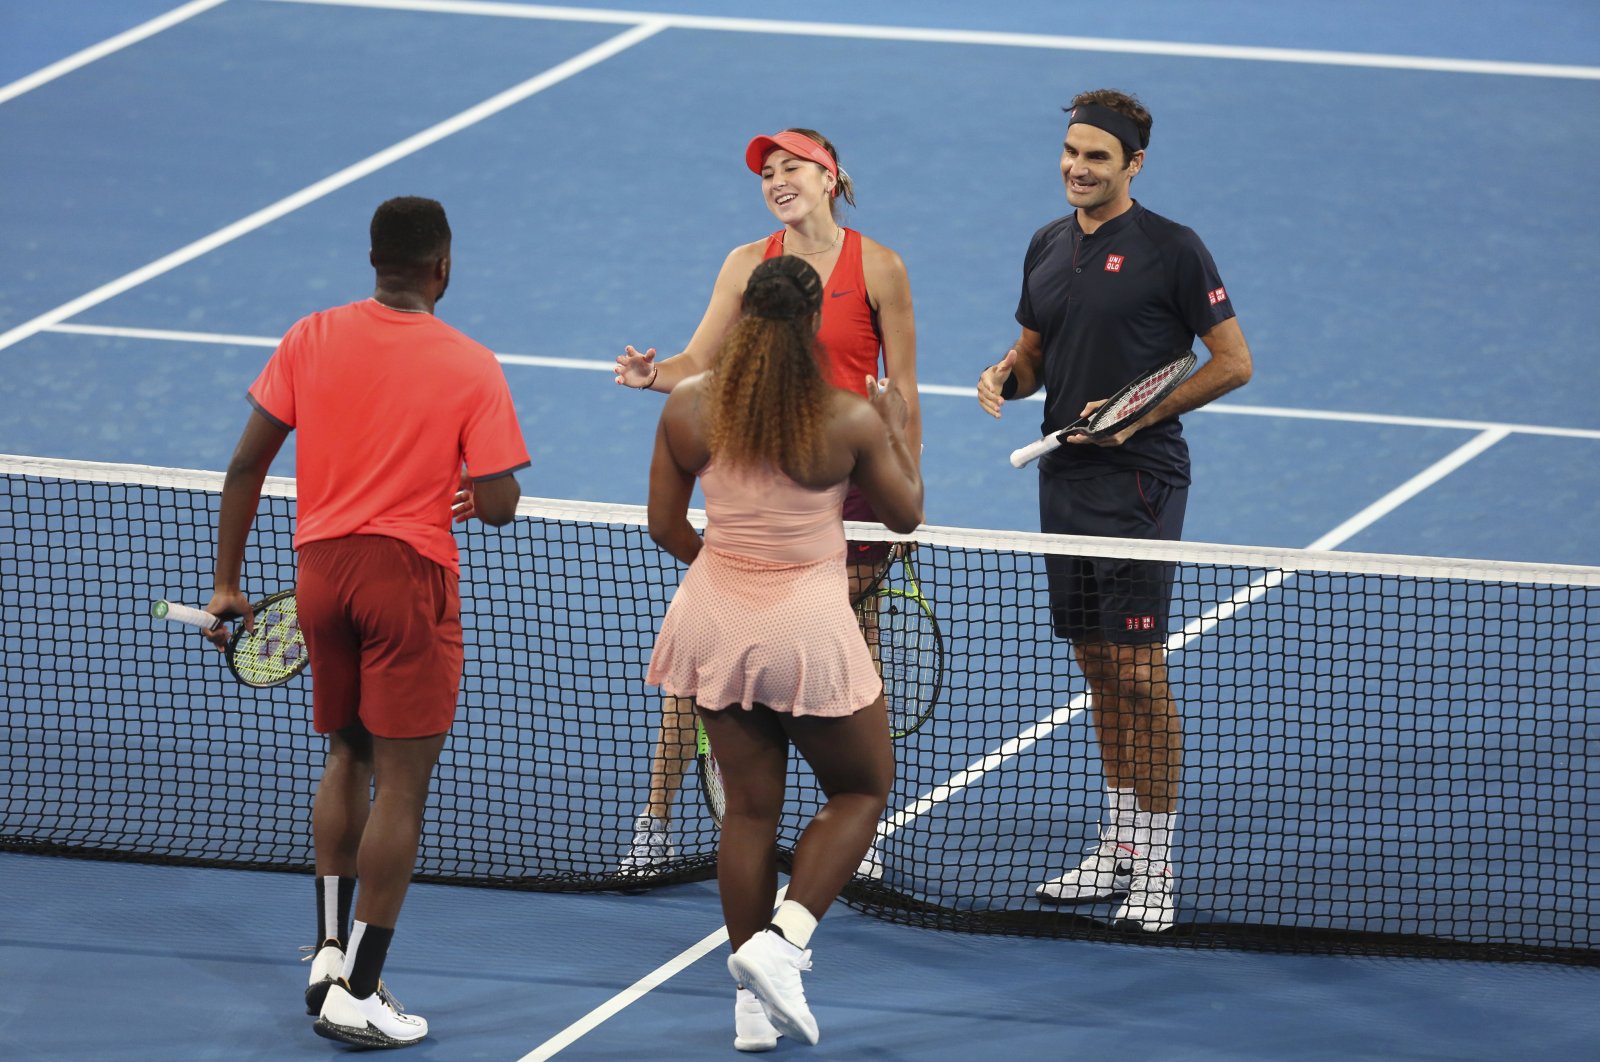 Roger Federer and Belinda Bencic wait at the net after winning their mixed doubles match against Frances Tiafoe and Serena Williams the Hopman Cup in Perth, Australia, Jan. 1, 2019. (AP Photo)